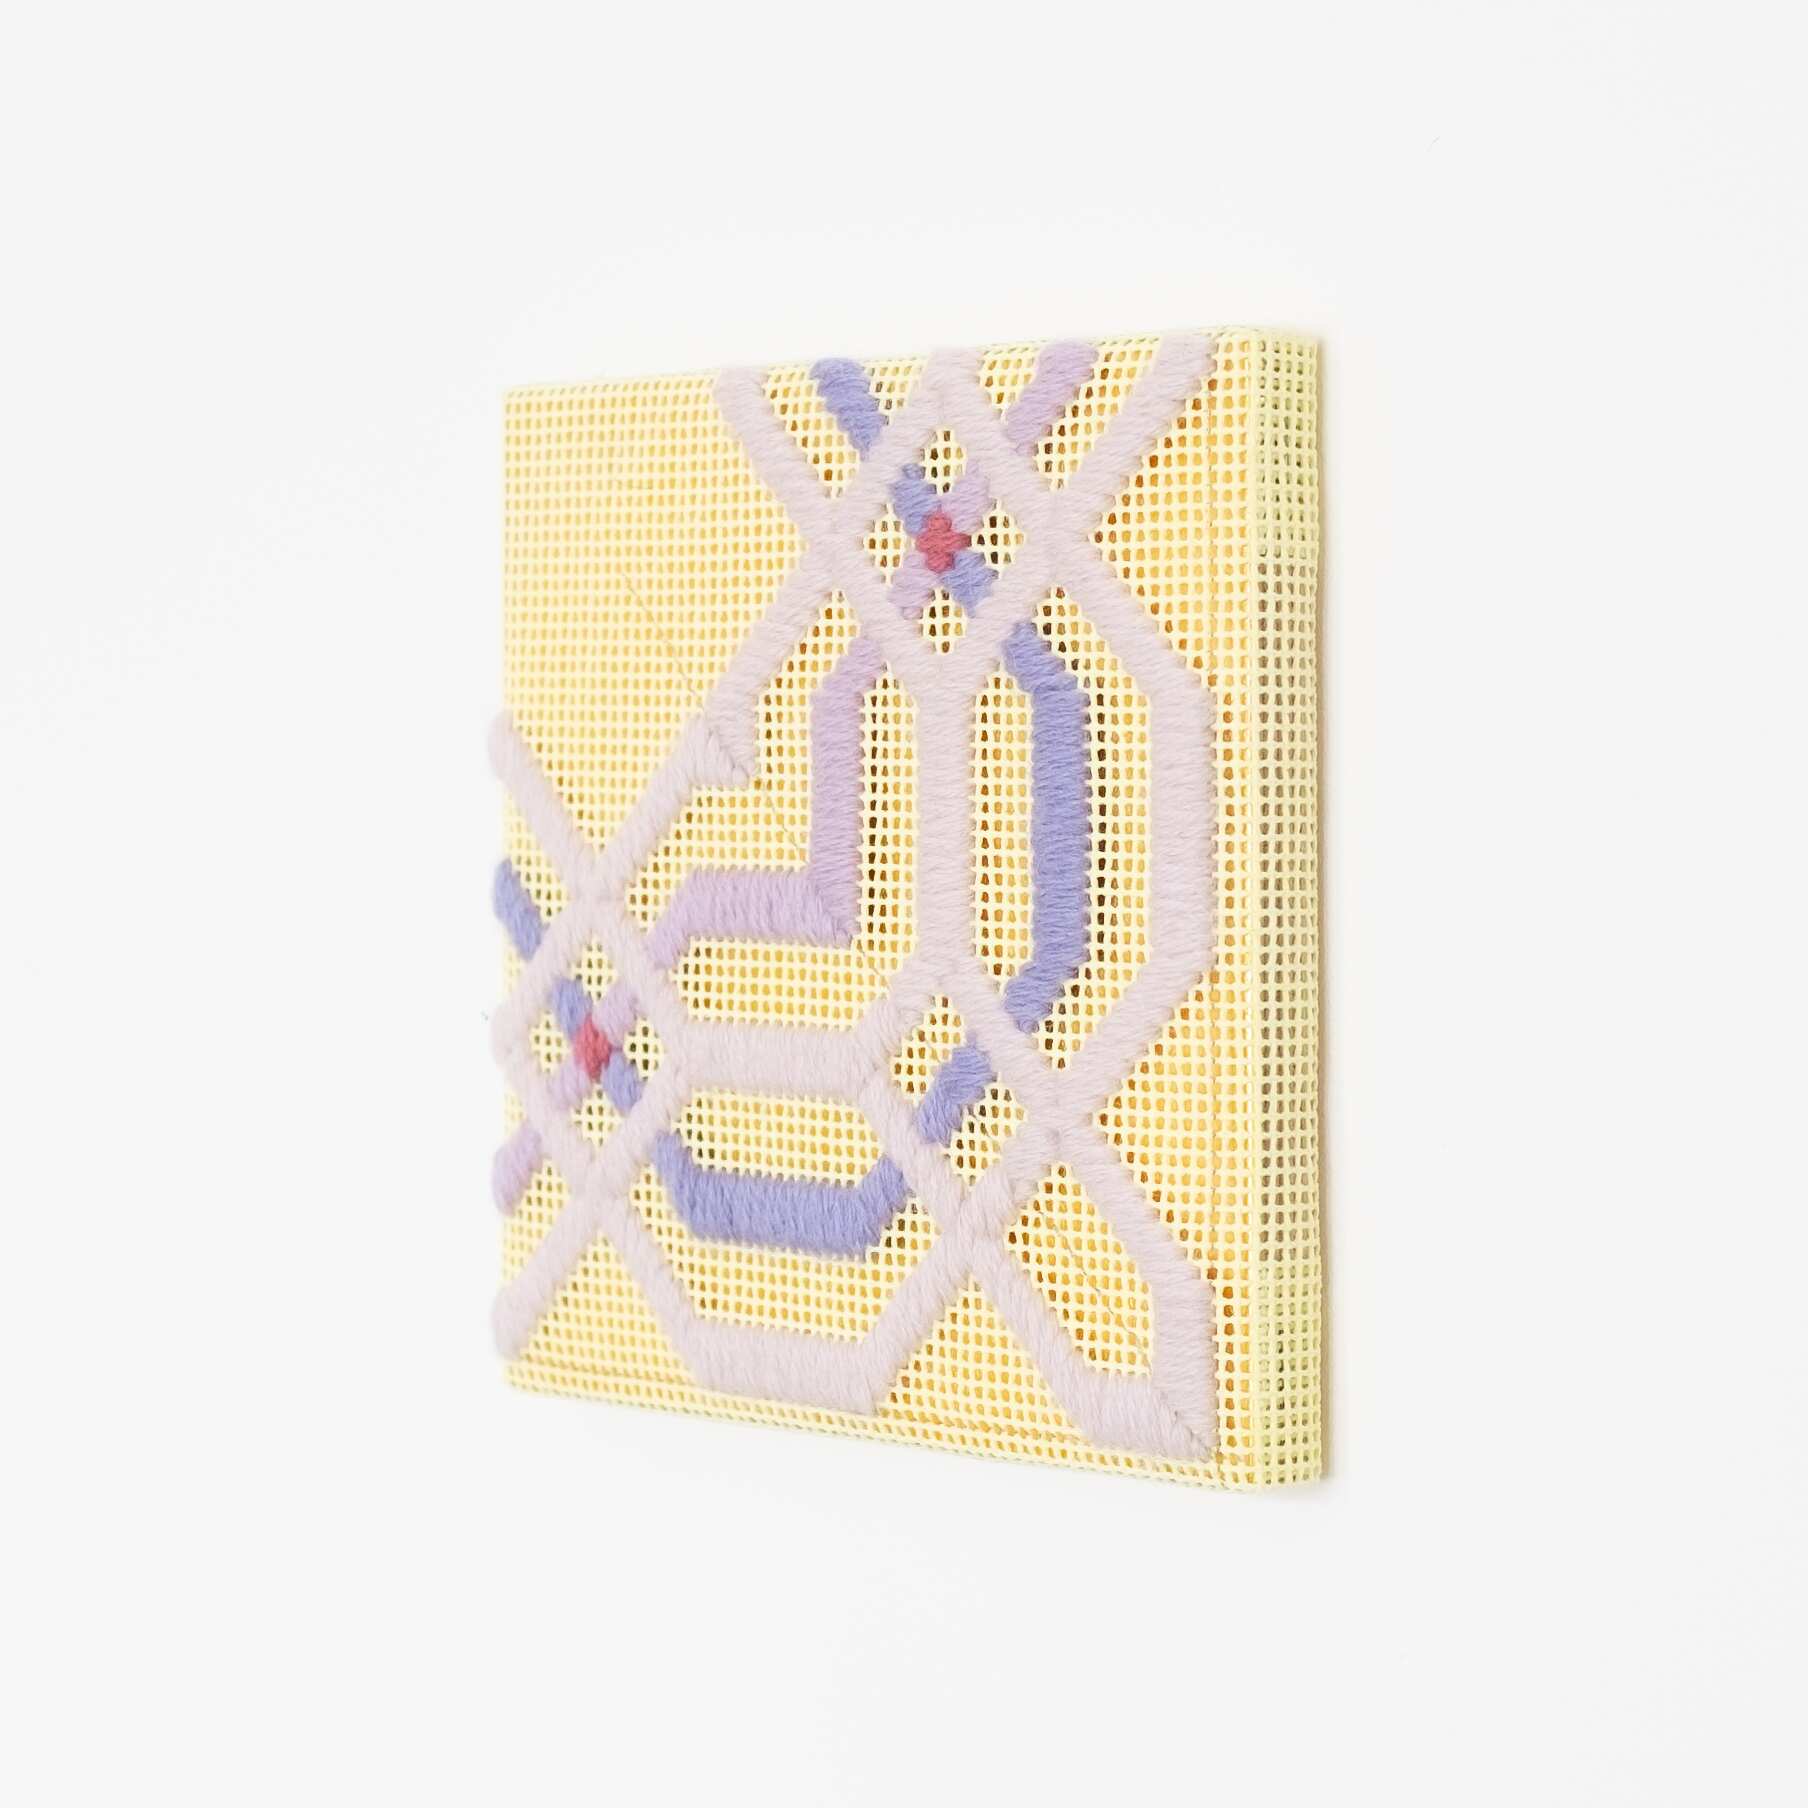 Border fragment [purple on yellow], Hand-embroidered wool thread and acrylic paint on canvas over gilded panel, 2021